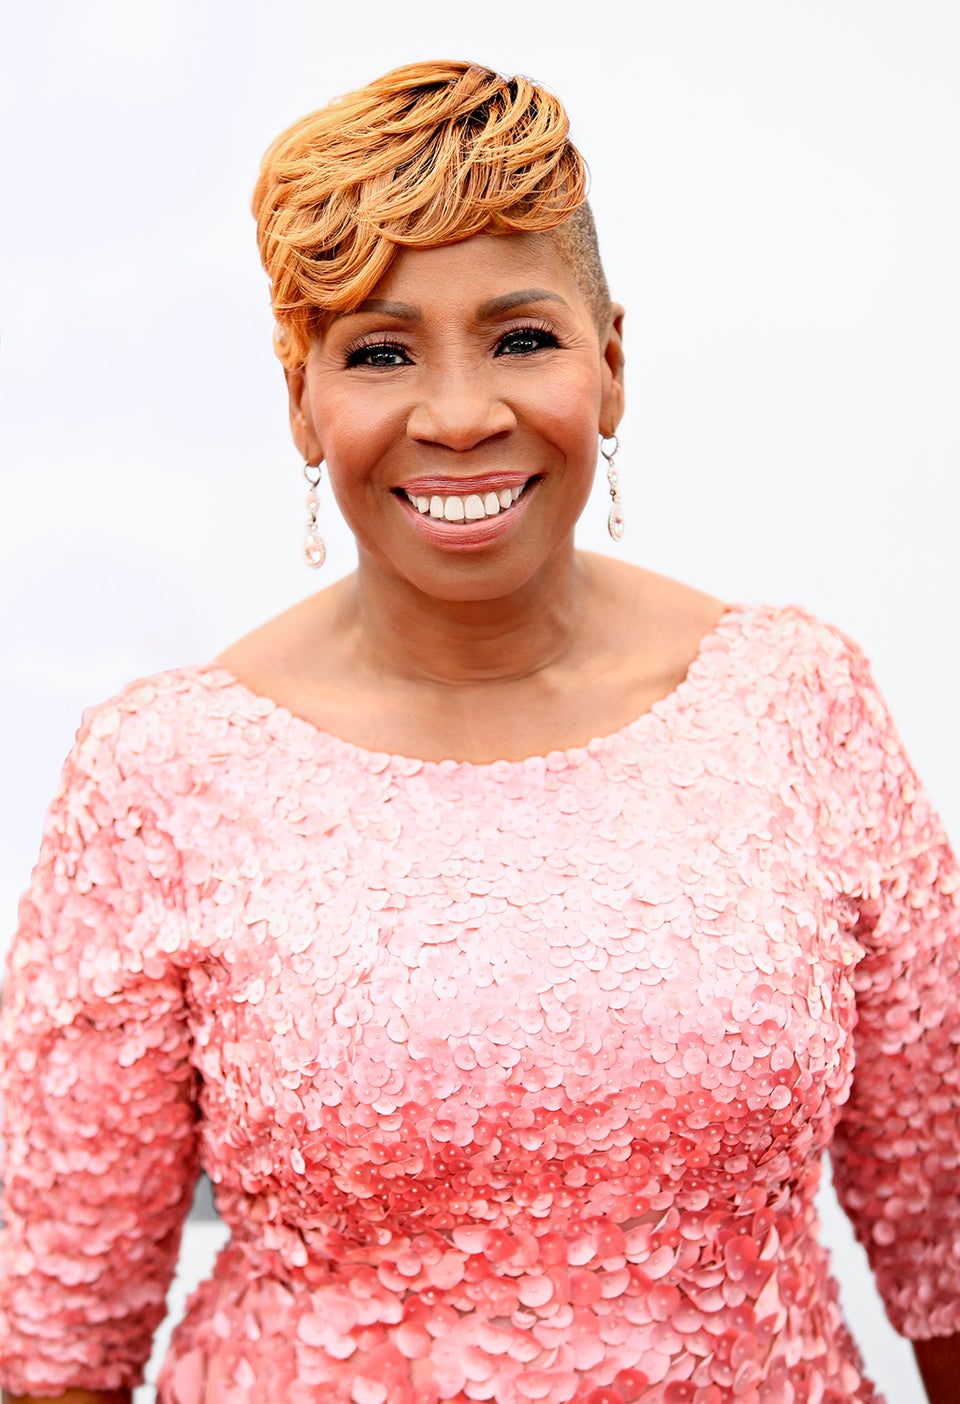 Exclusive: Iyanla Vanzant Opens Up About The Medical Emergency That Nearly Killed Her